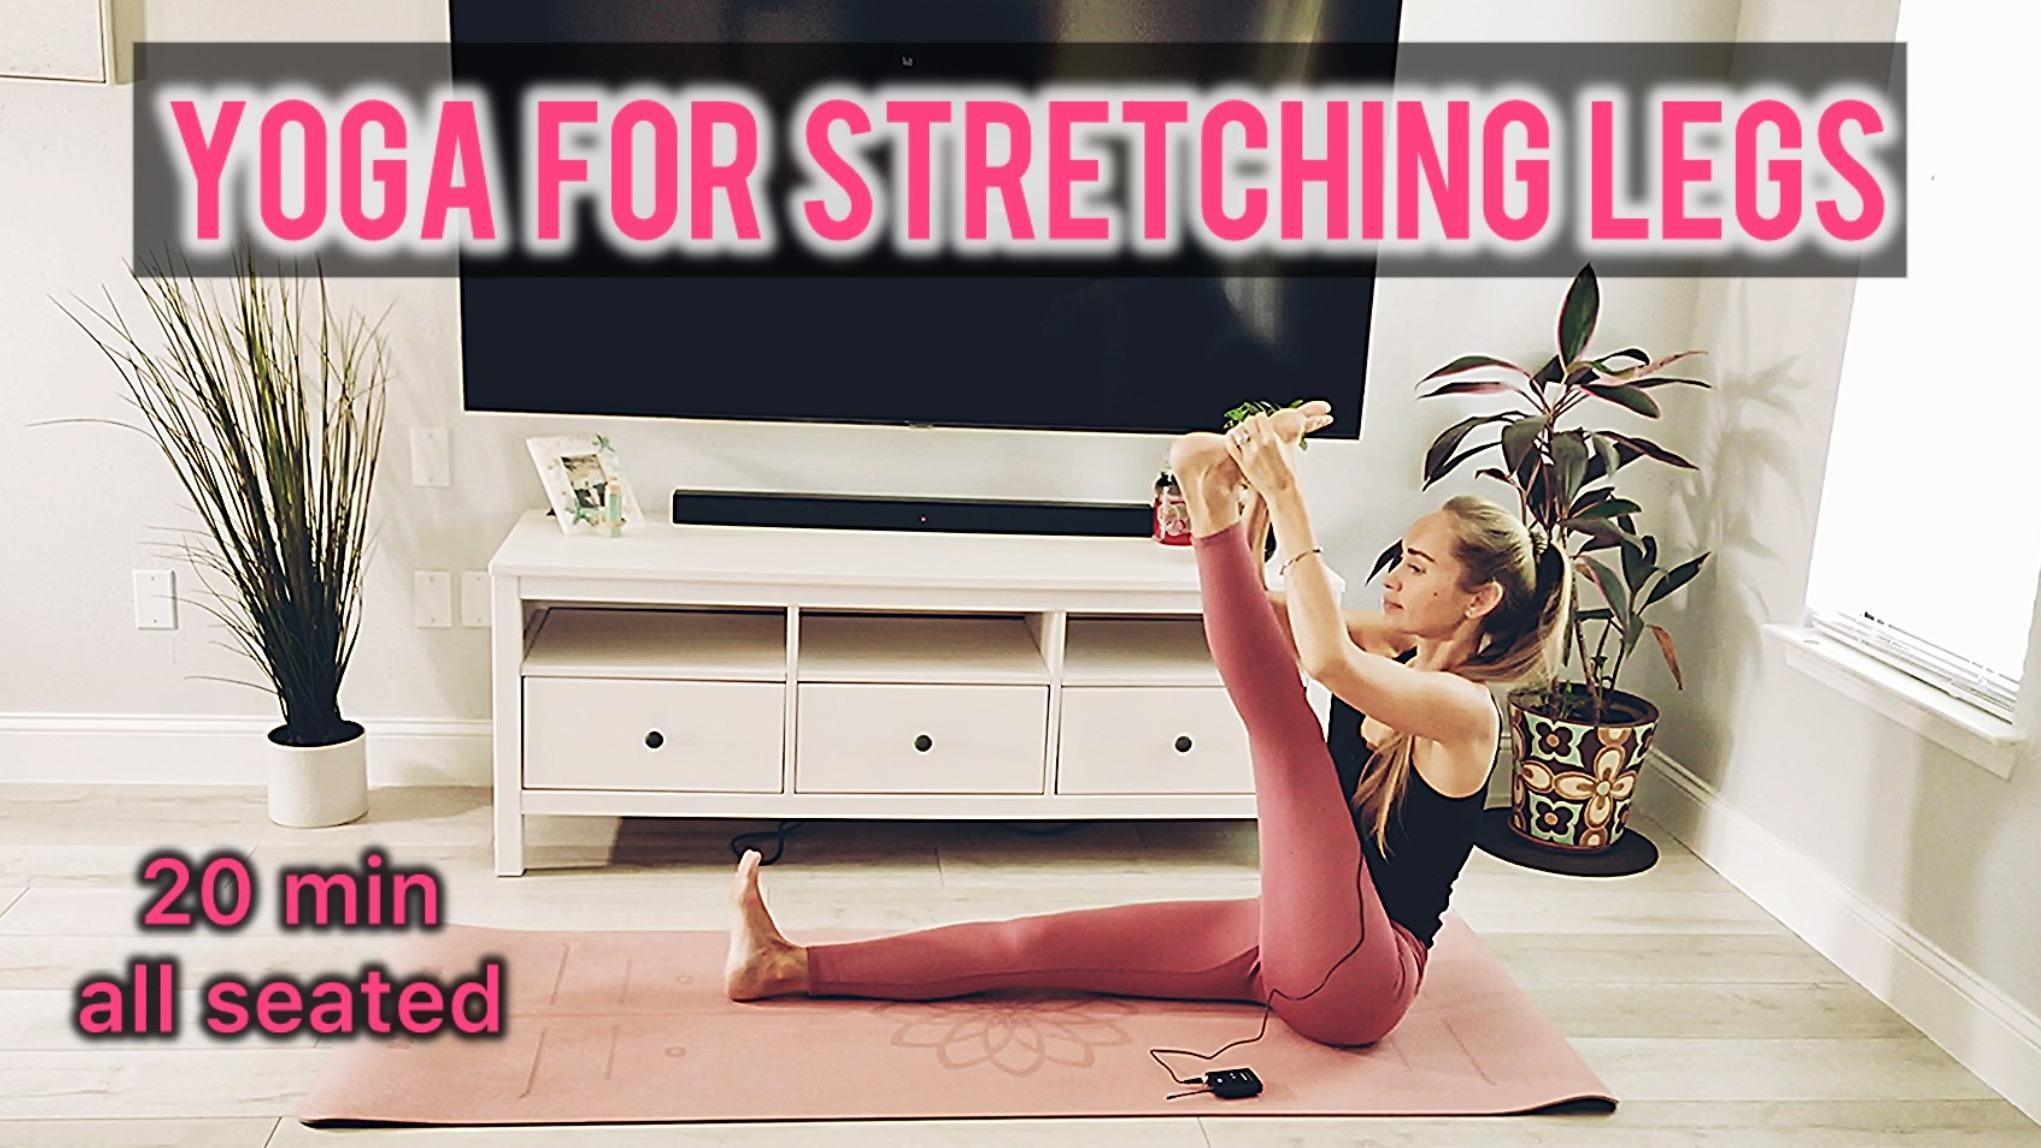 20 min yoga for stretching legs